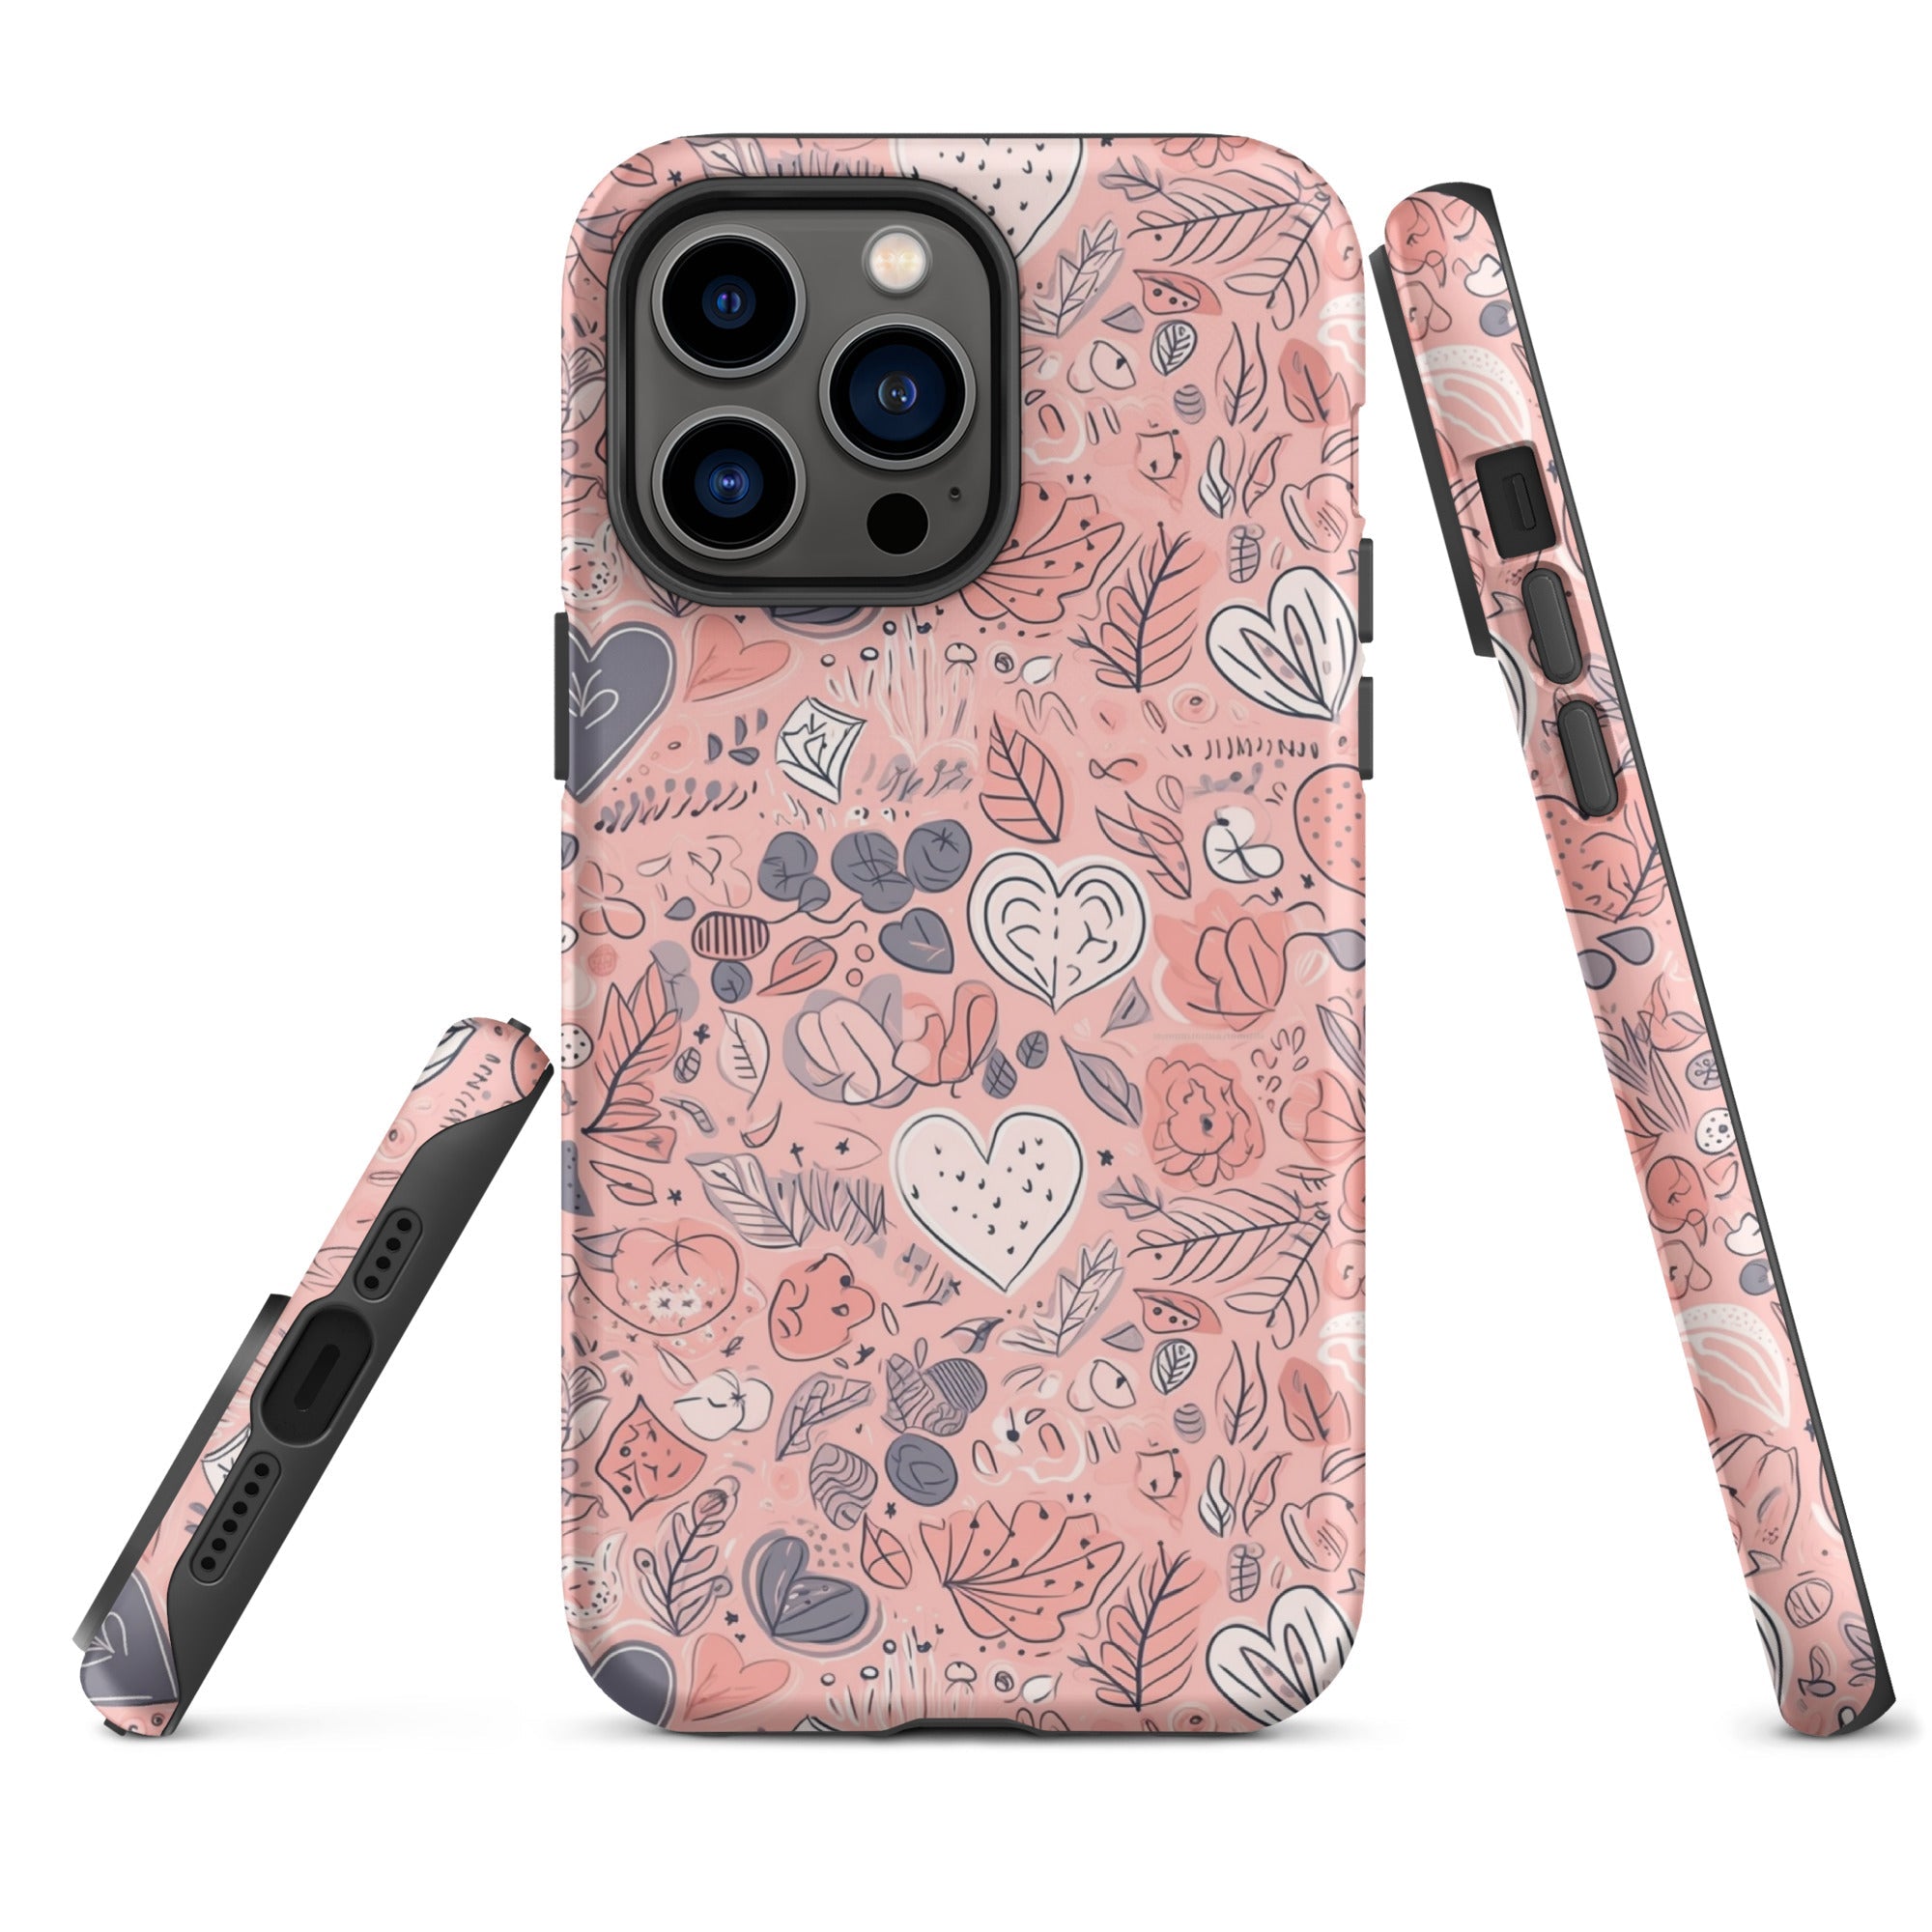 Springtime Blushing Hearts and Leaves - Whimsical Romance - iPhone Case - Pattern Symphony